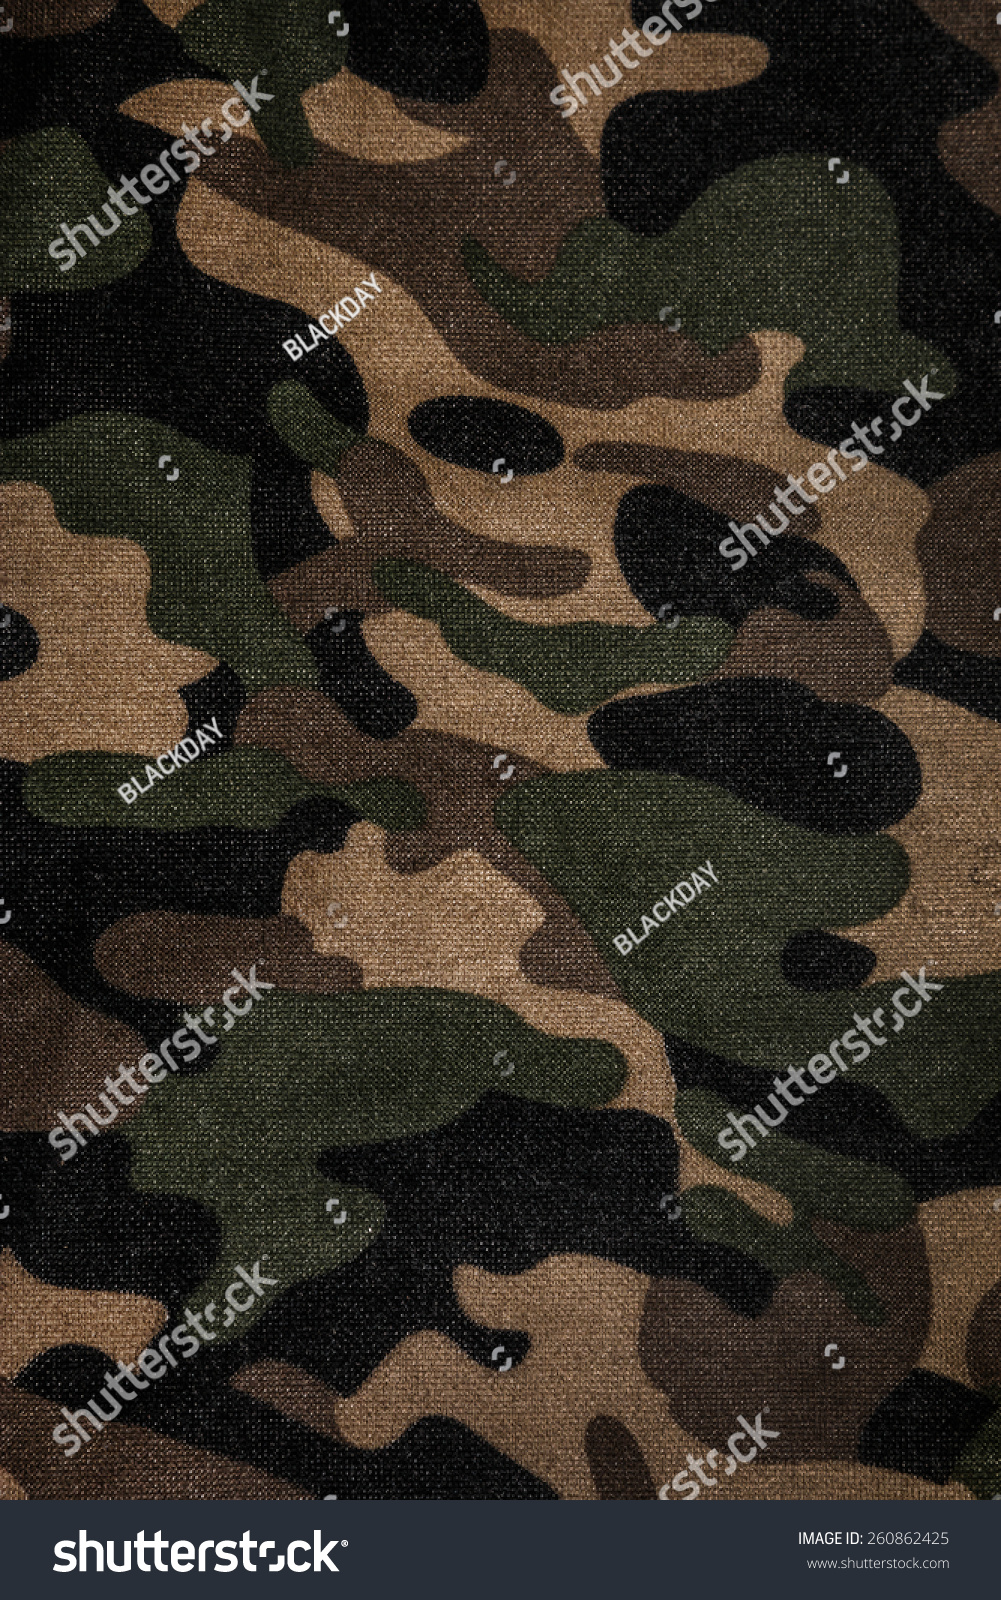 Texture Of A Camouflage Fabric Stock Photo 260862425 : Shutterstock